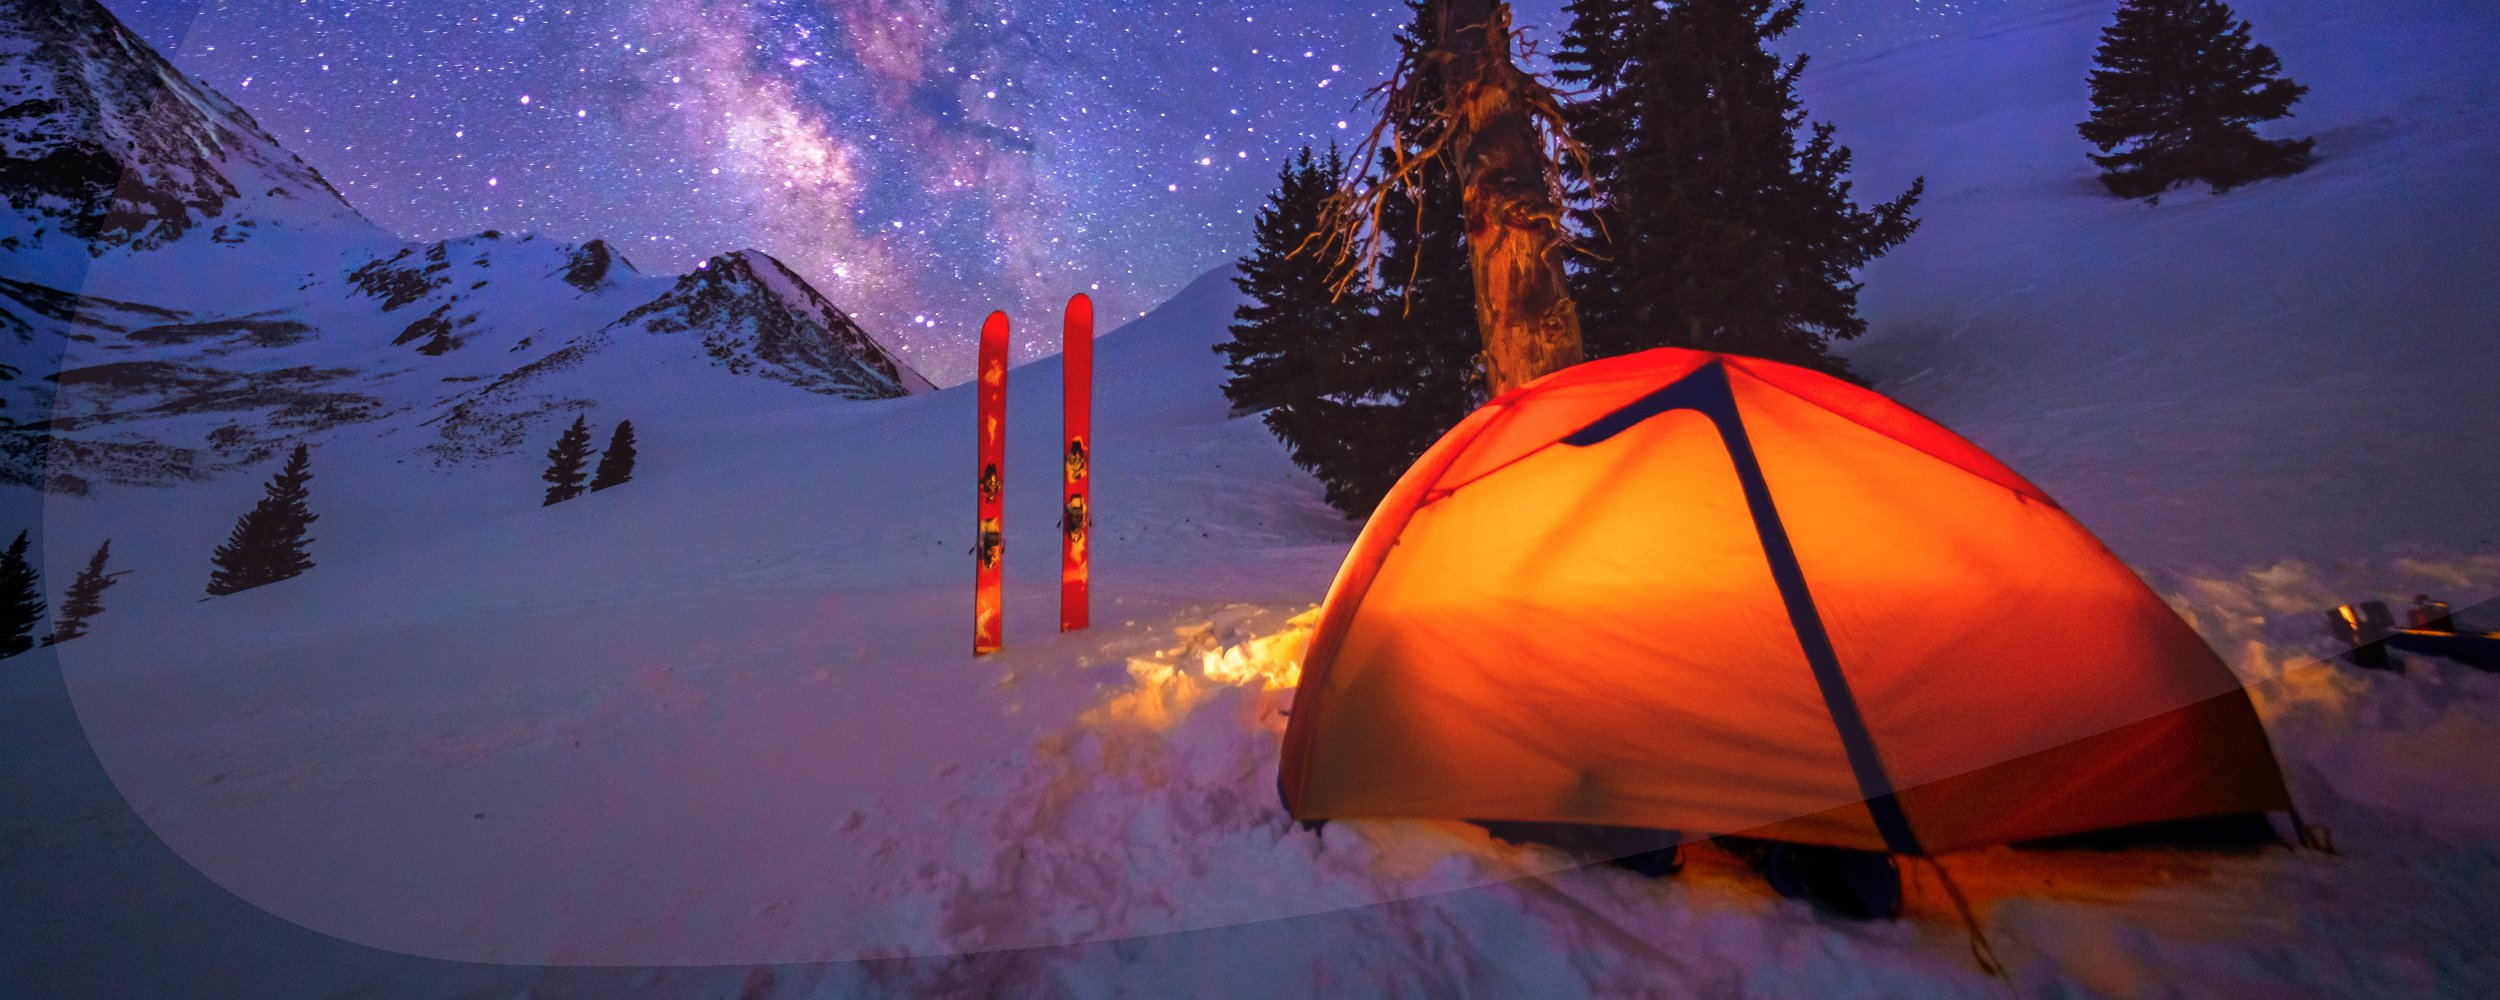 Ski camp setup with glowing tent at high altitude under mountain ridge with stars and Milky Way Galaxy.